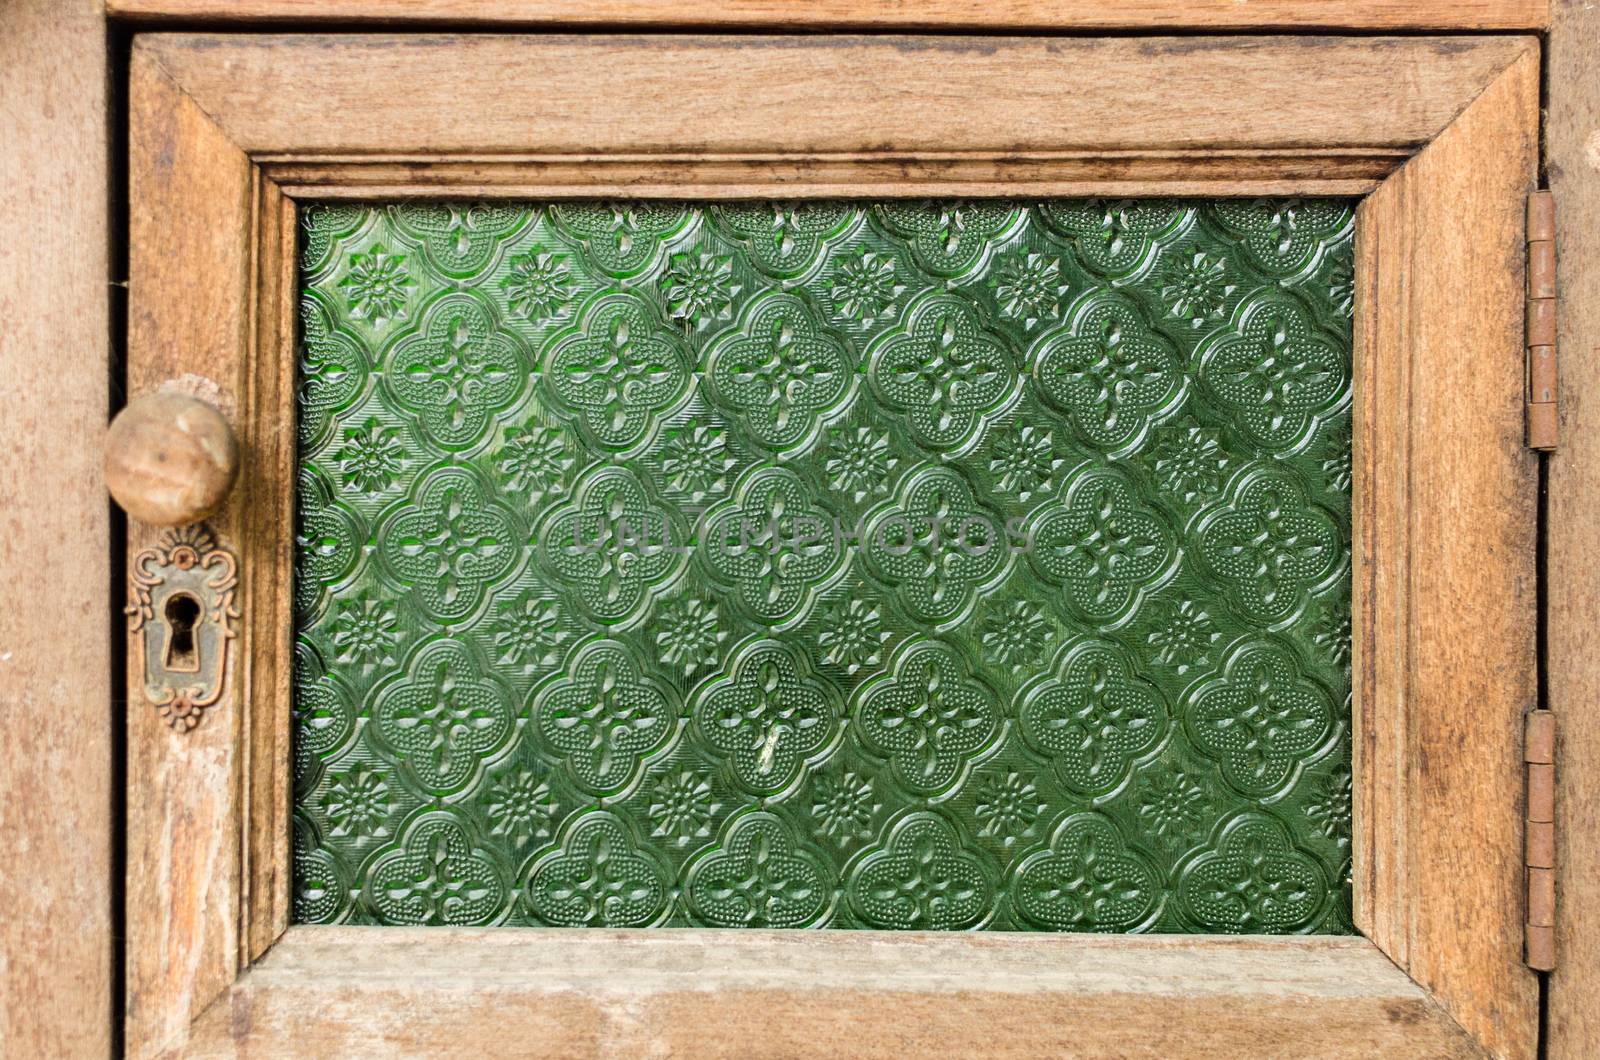 Sheet of glass texture, Green star pattern for wood window